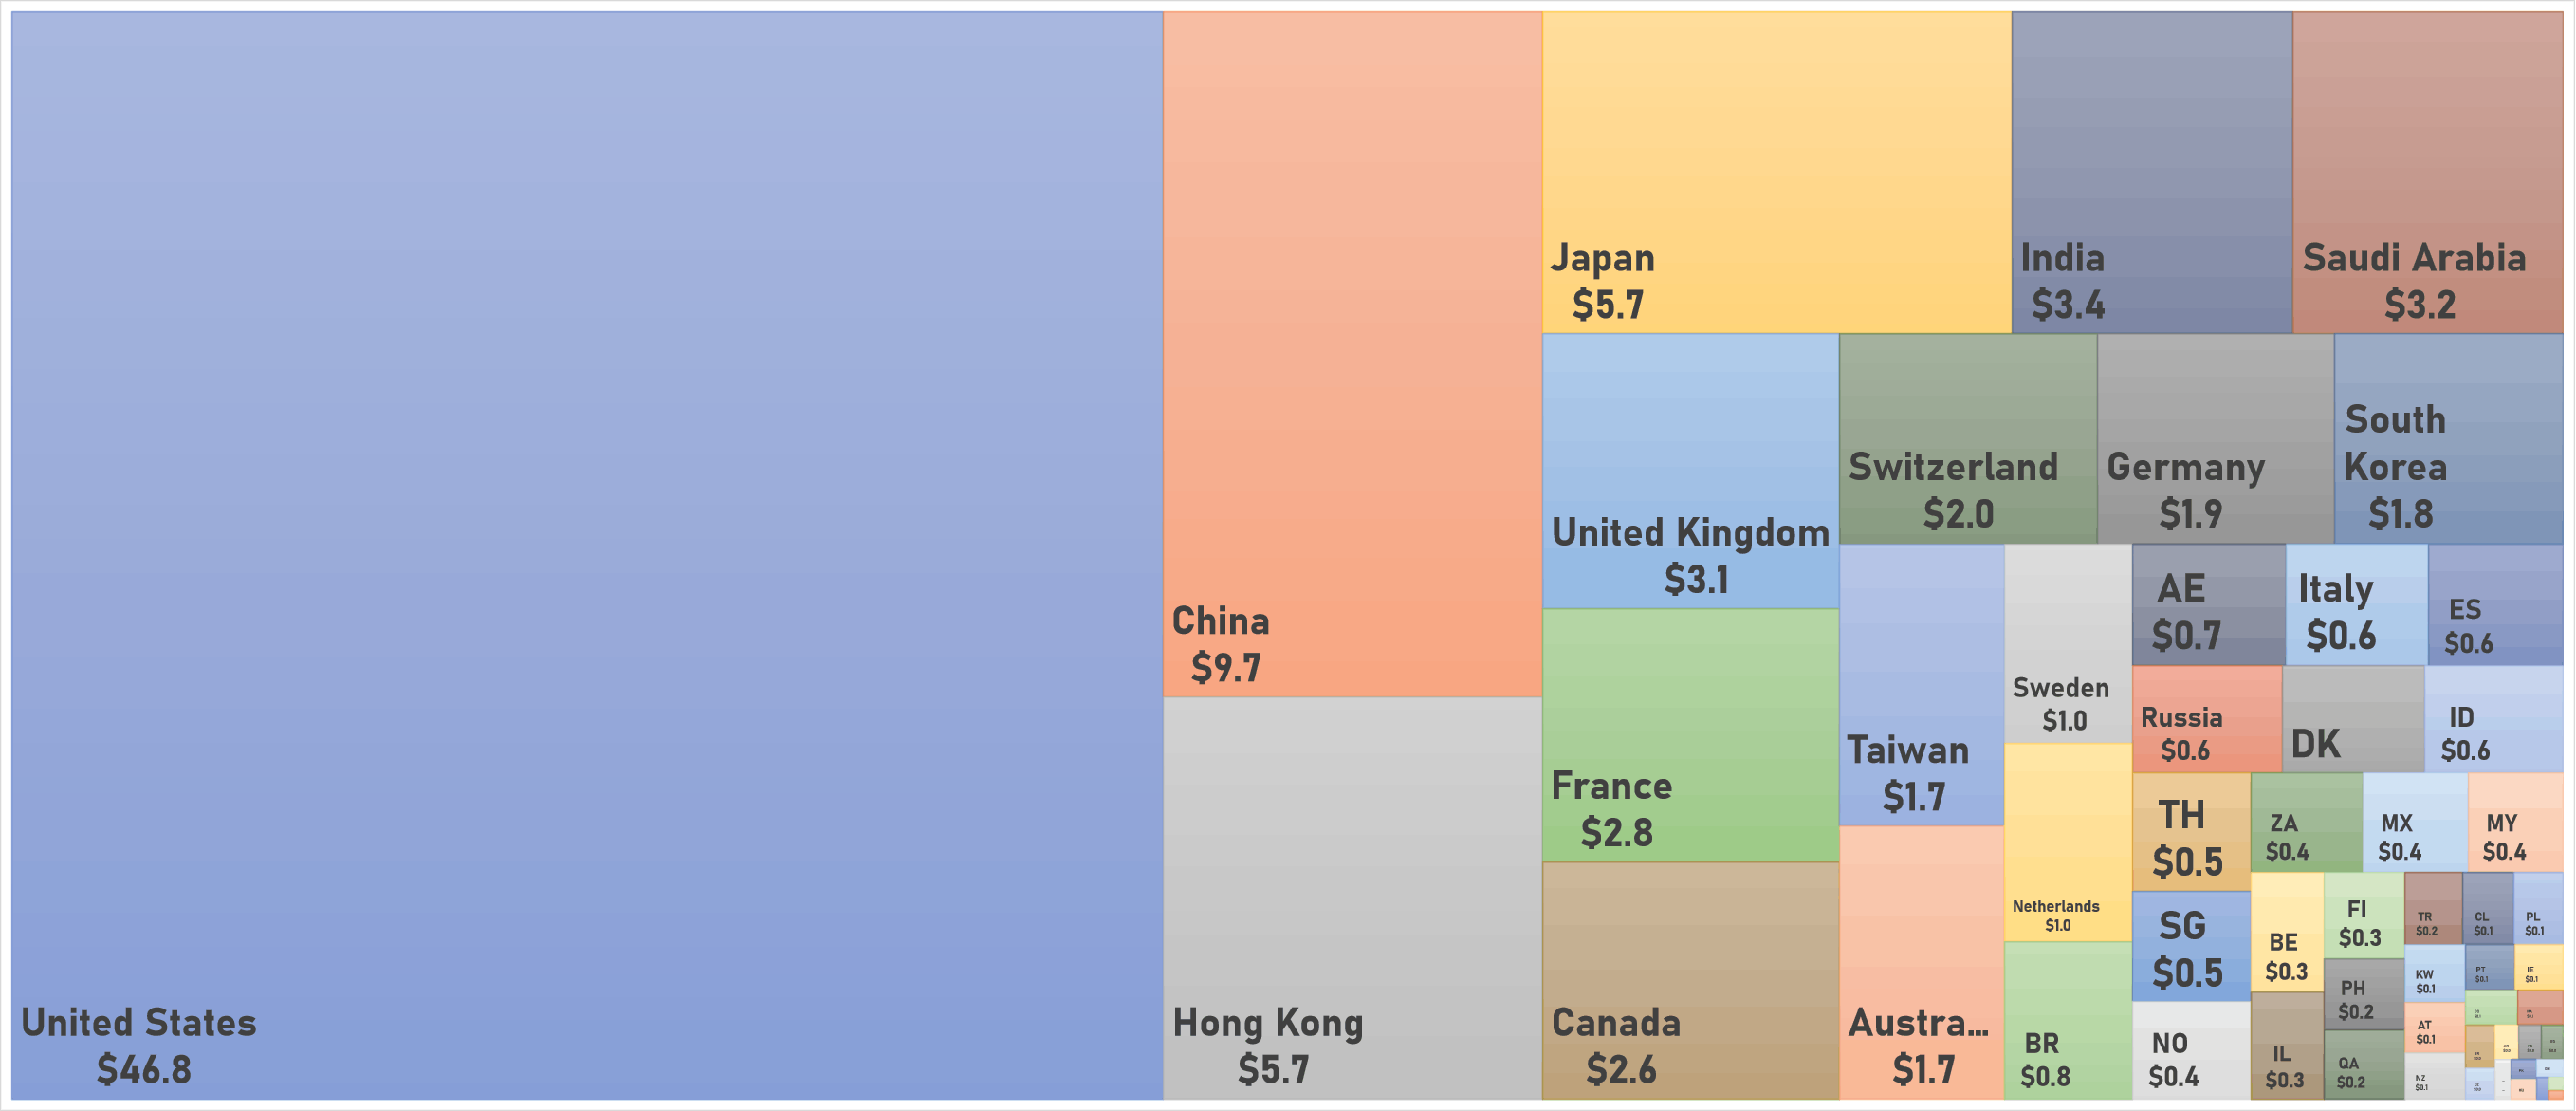 World Market Capitalization in US$ Trillion by Country | Sources: phipost.com, FactSet data